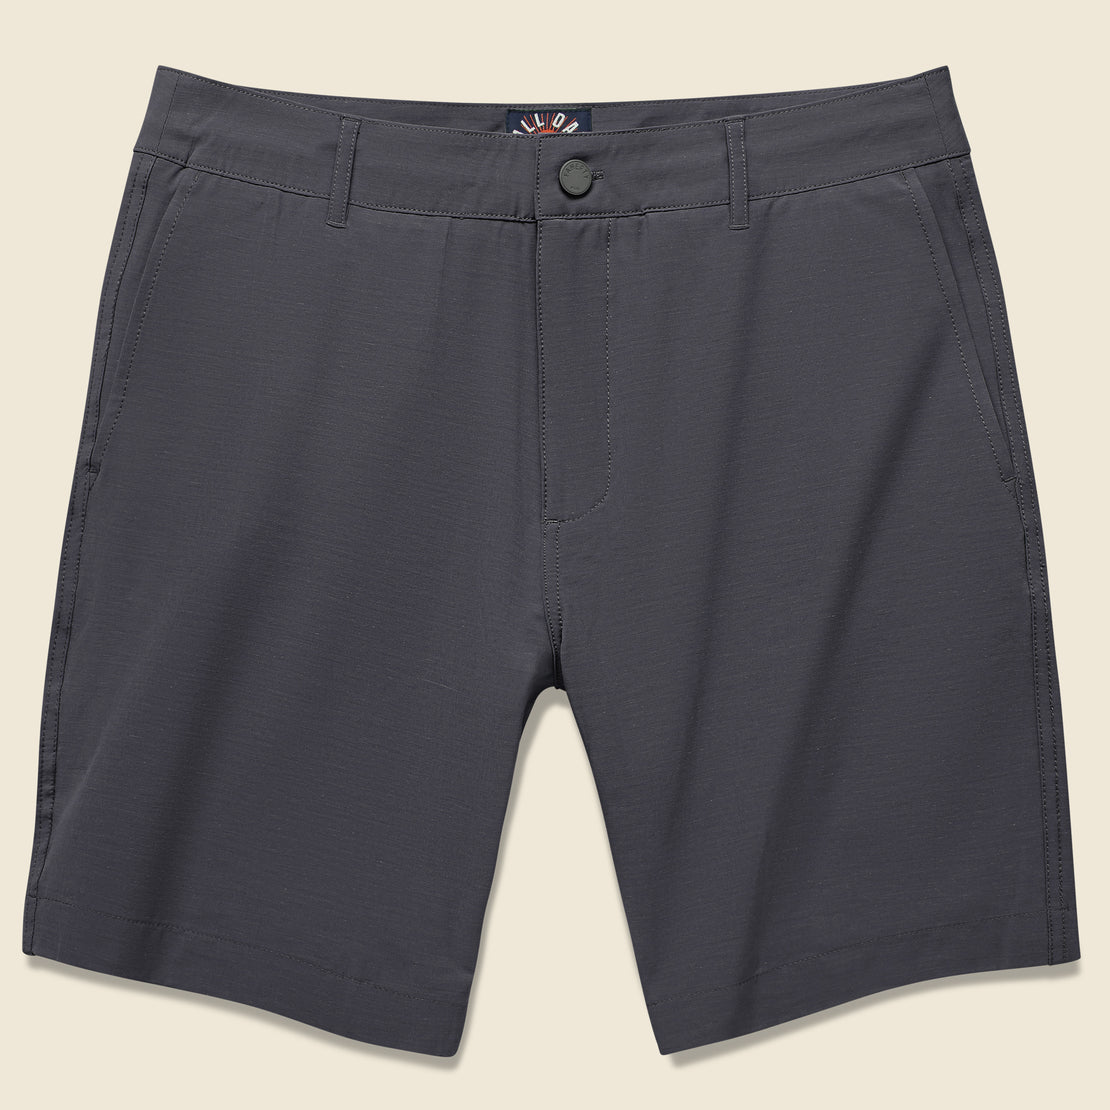 Faherty Belt Loop All Day Short 7-Inch - Charcoal